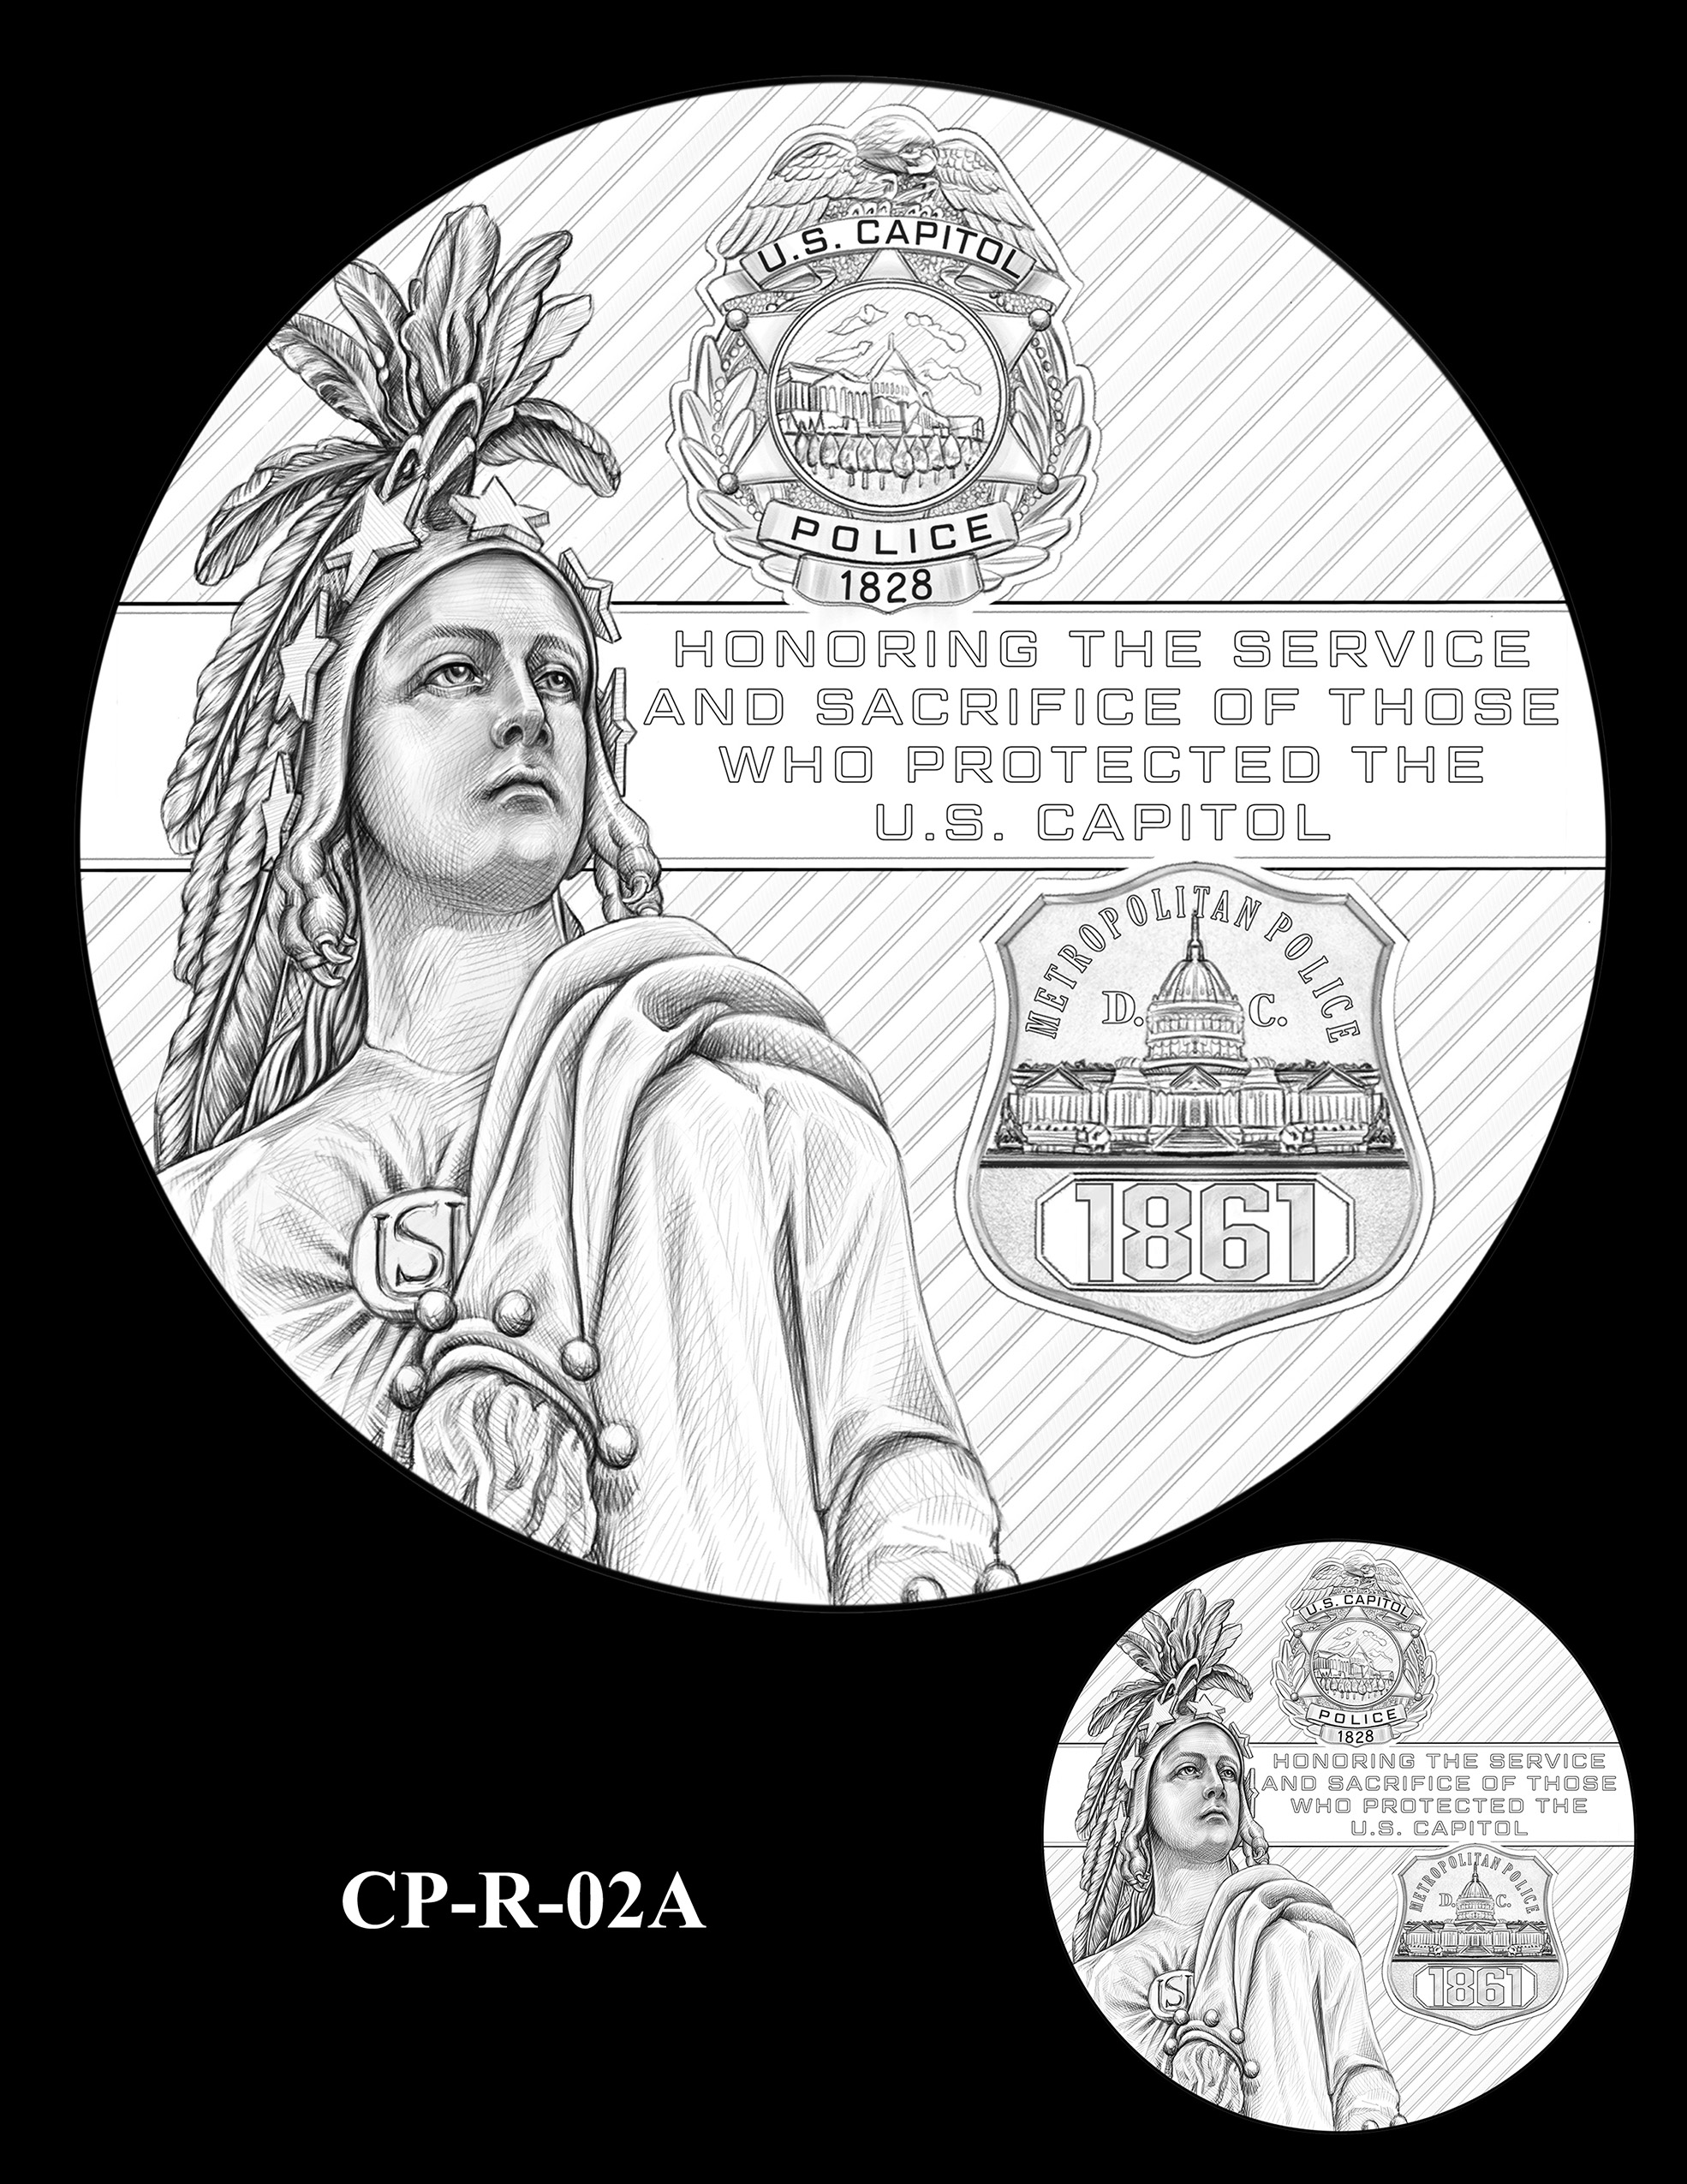 CP-R-02A -- Congressional Gold Medal for Those Who Protected the U.S. Capitol on January 6th 2021